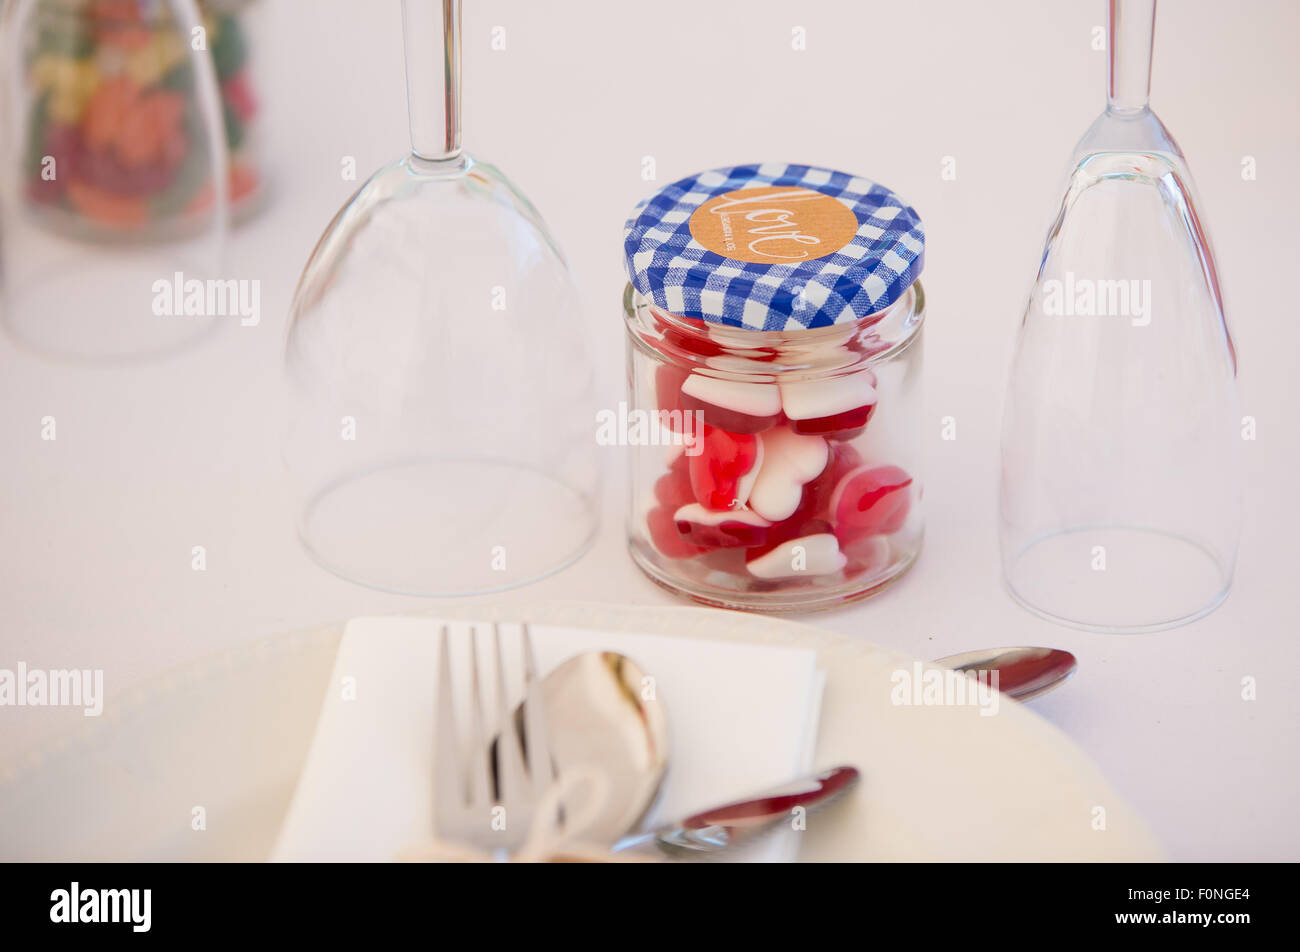 Love heart jelly sweets in a jar on a table as a wedding favor gift. Stock Photo